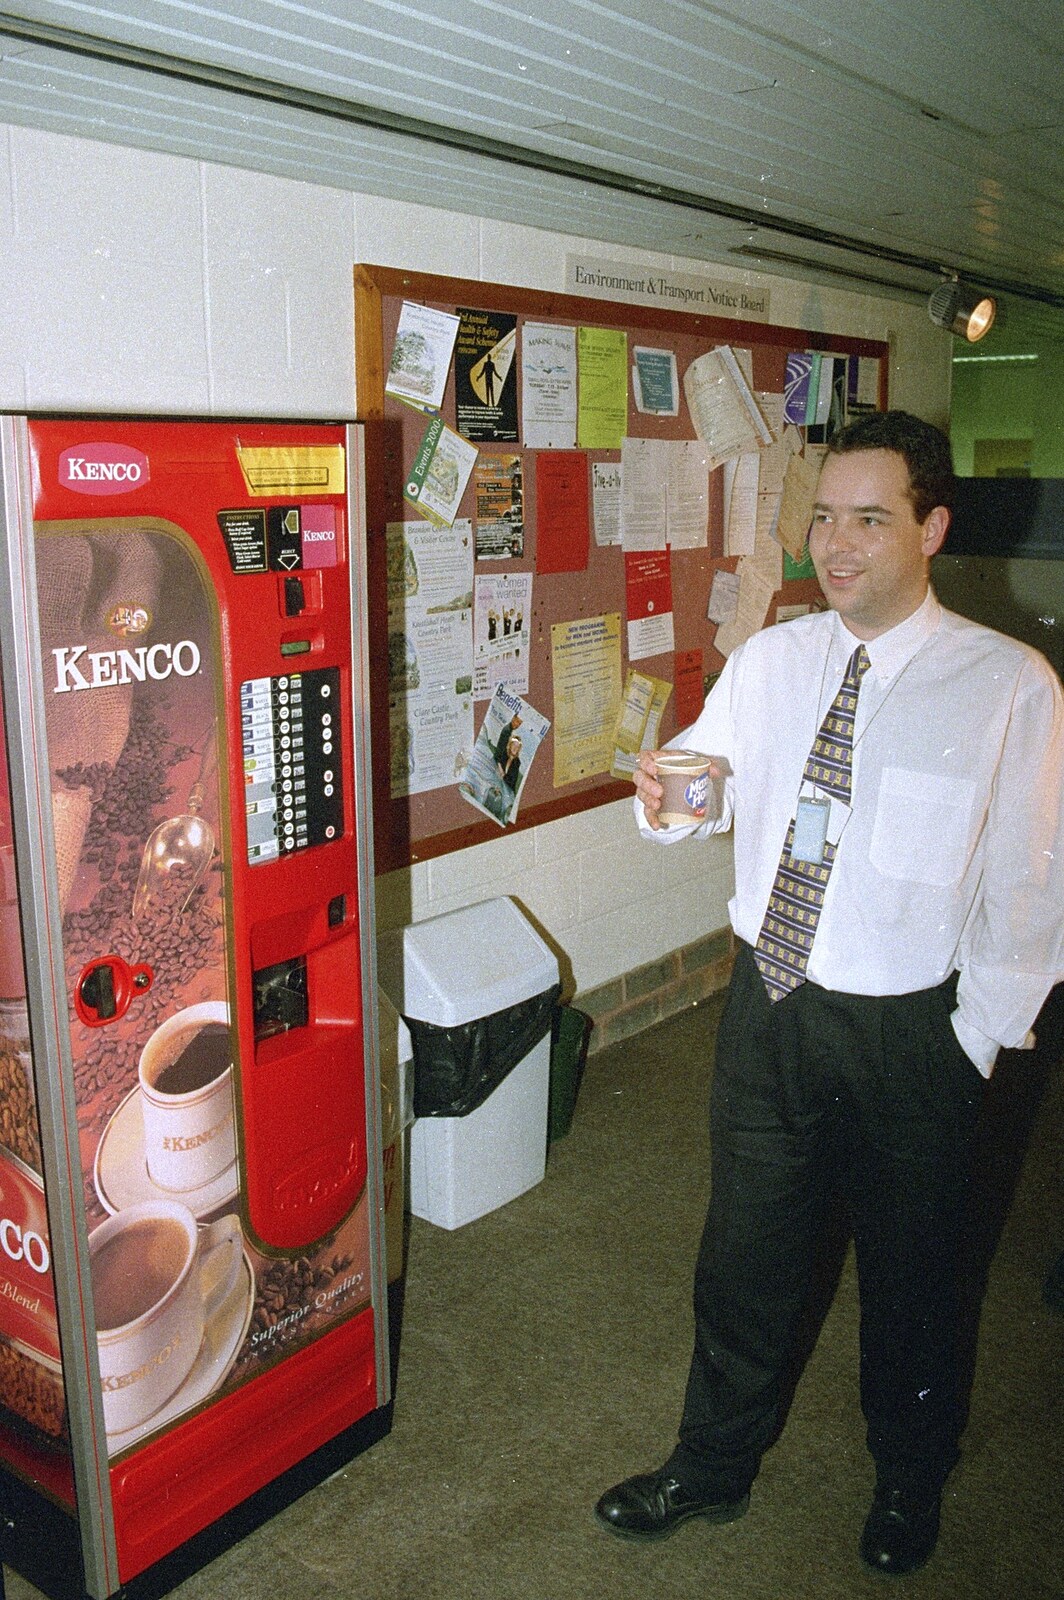 Nosher's Last Day at CISU/SCC, Suffolk County Council, Ipswich - 22nd June 2000: Russell with a cup of coffee